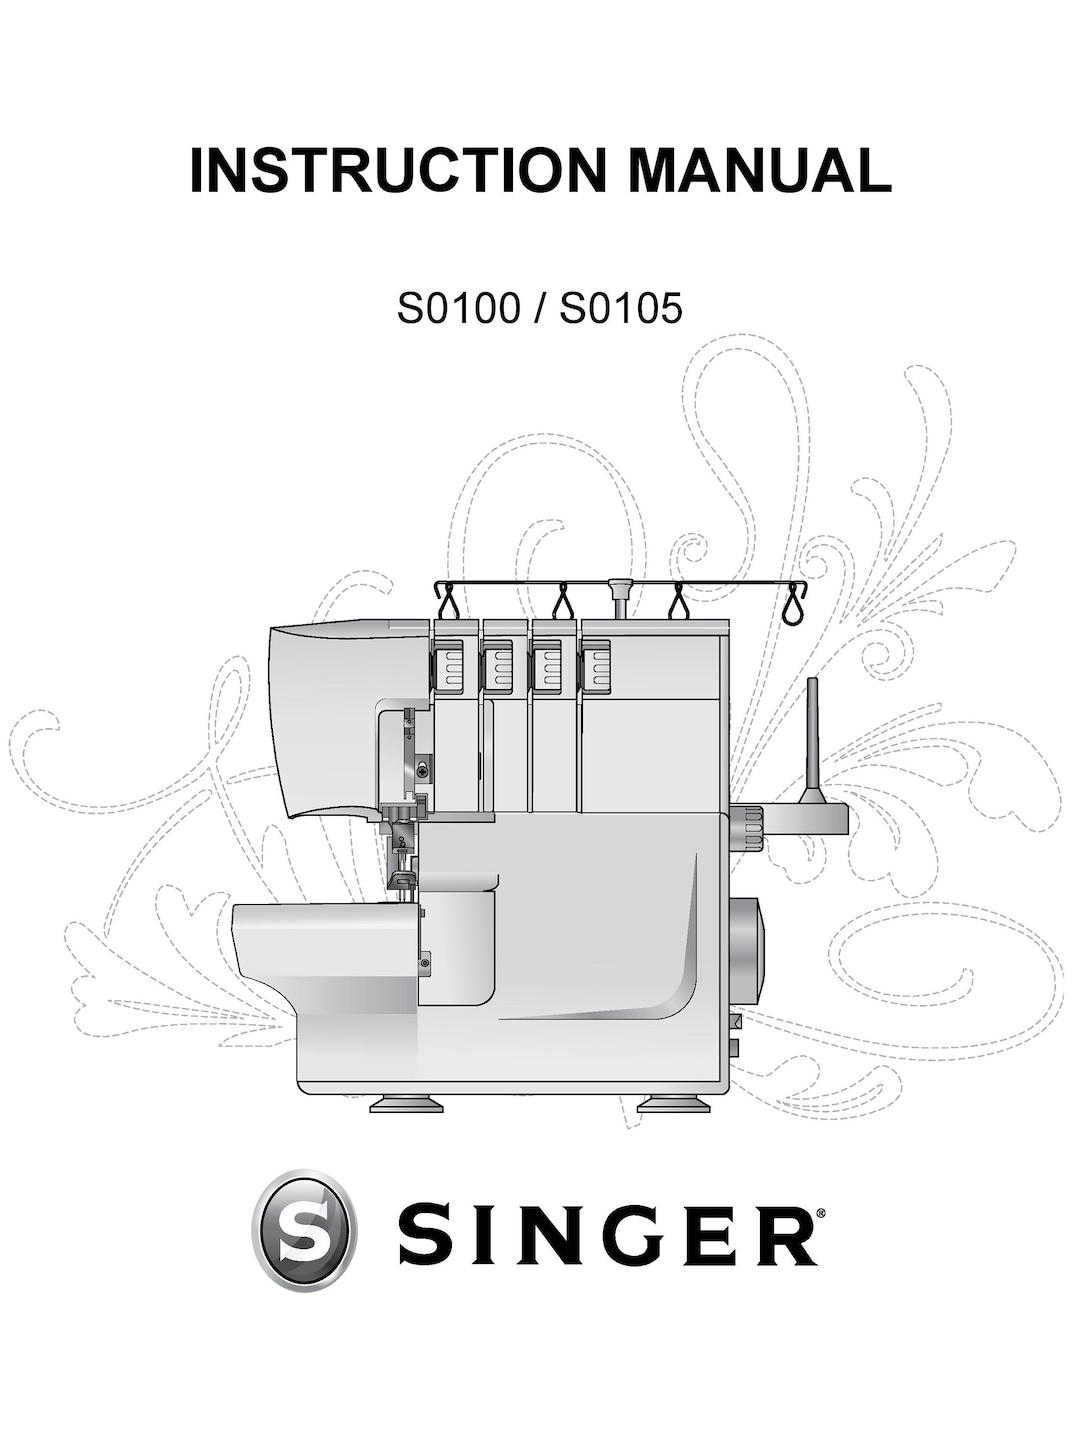 Singer S0100 S0105 Sewing Machine Instruction Manual User Manual Complete  User Guide English